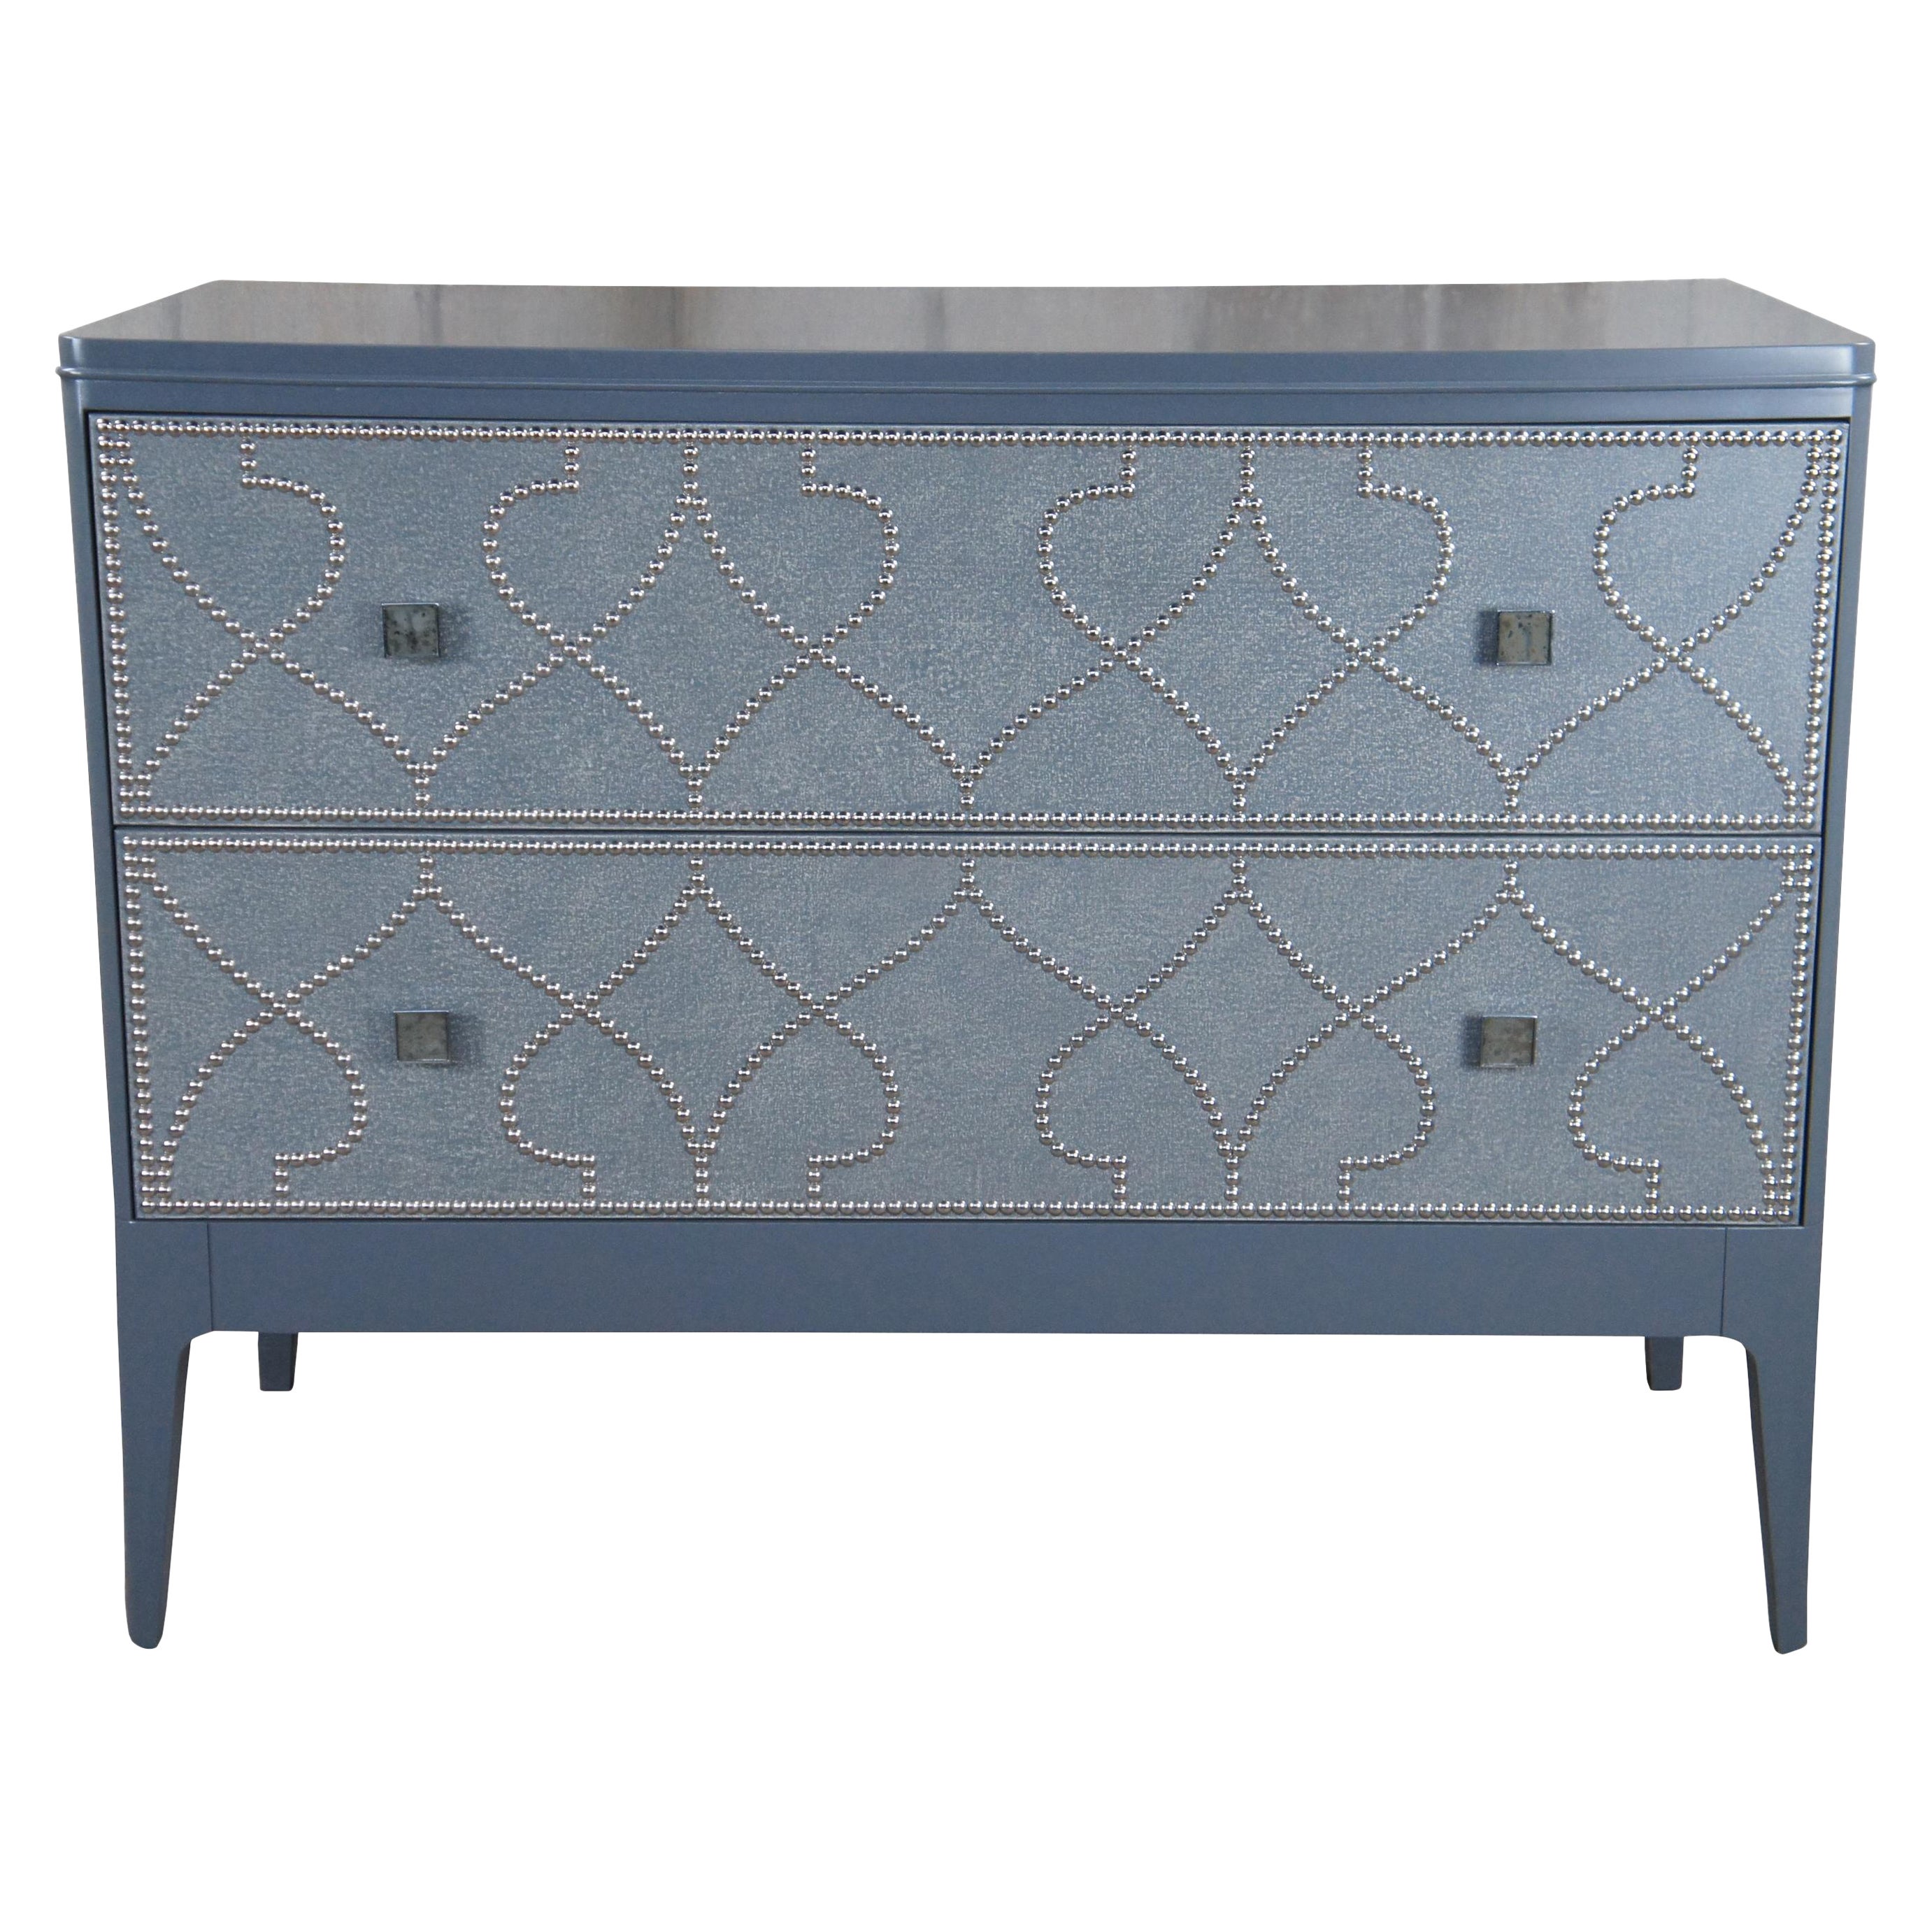 Artistica Contemporary Modern Hall Chest 2 Drawer Geometric Dresser Console For Sale